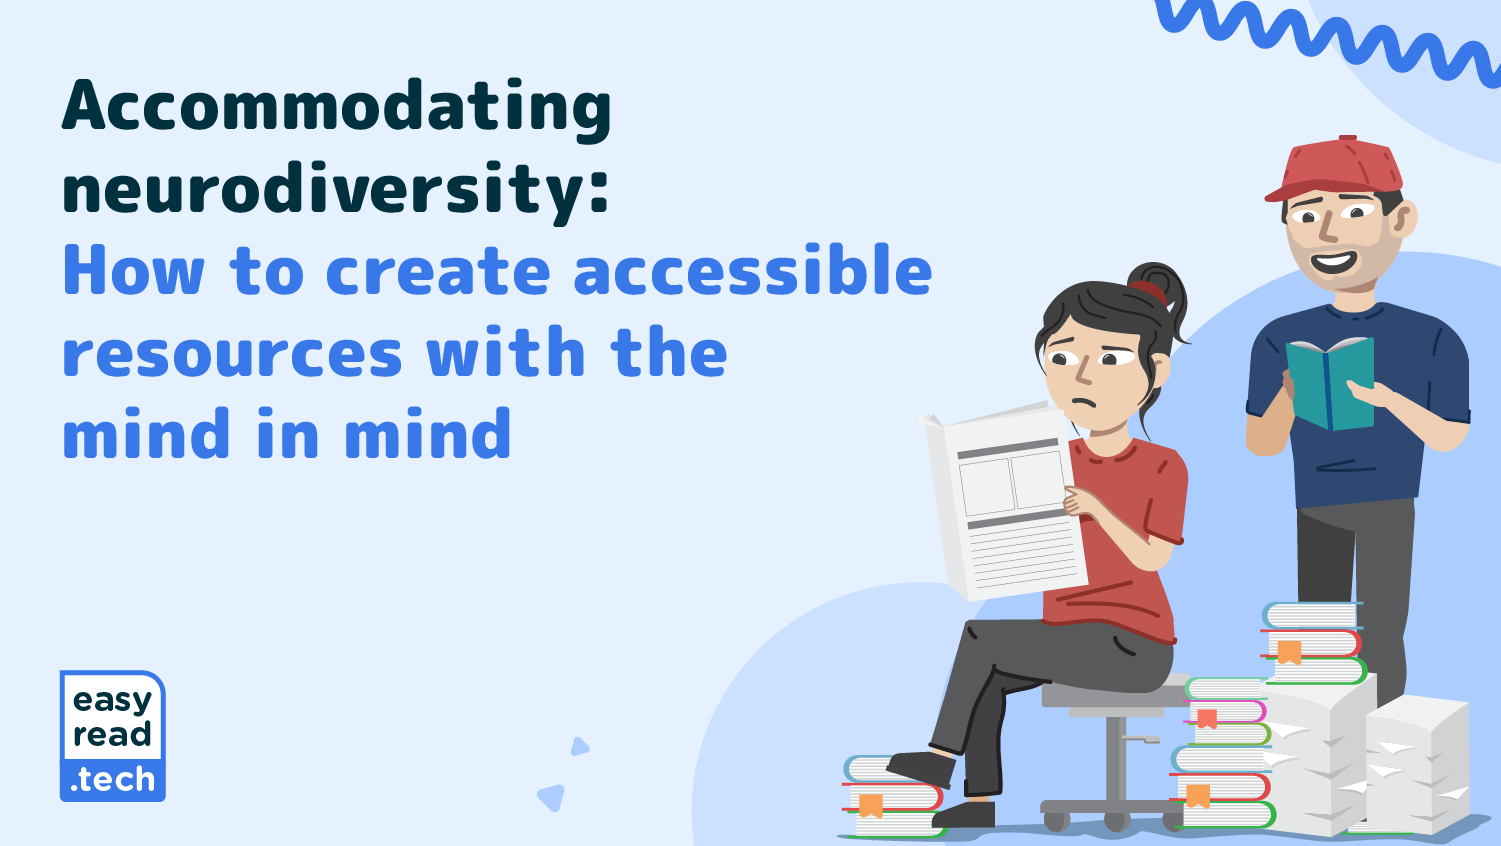 Accommodating neurodiversity: How to create accessible resources with the mind in mind. Easy read.tech.